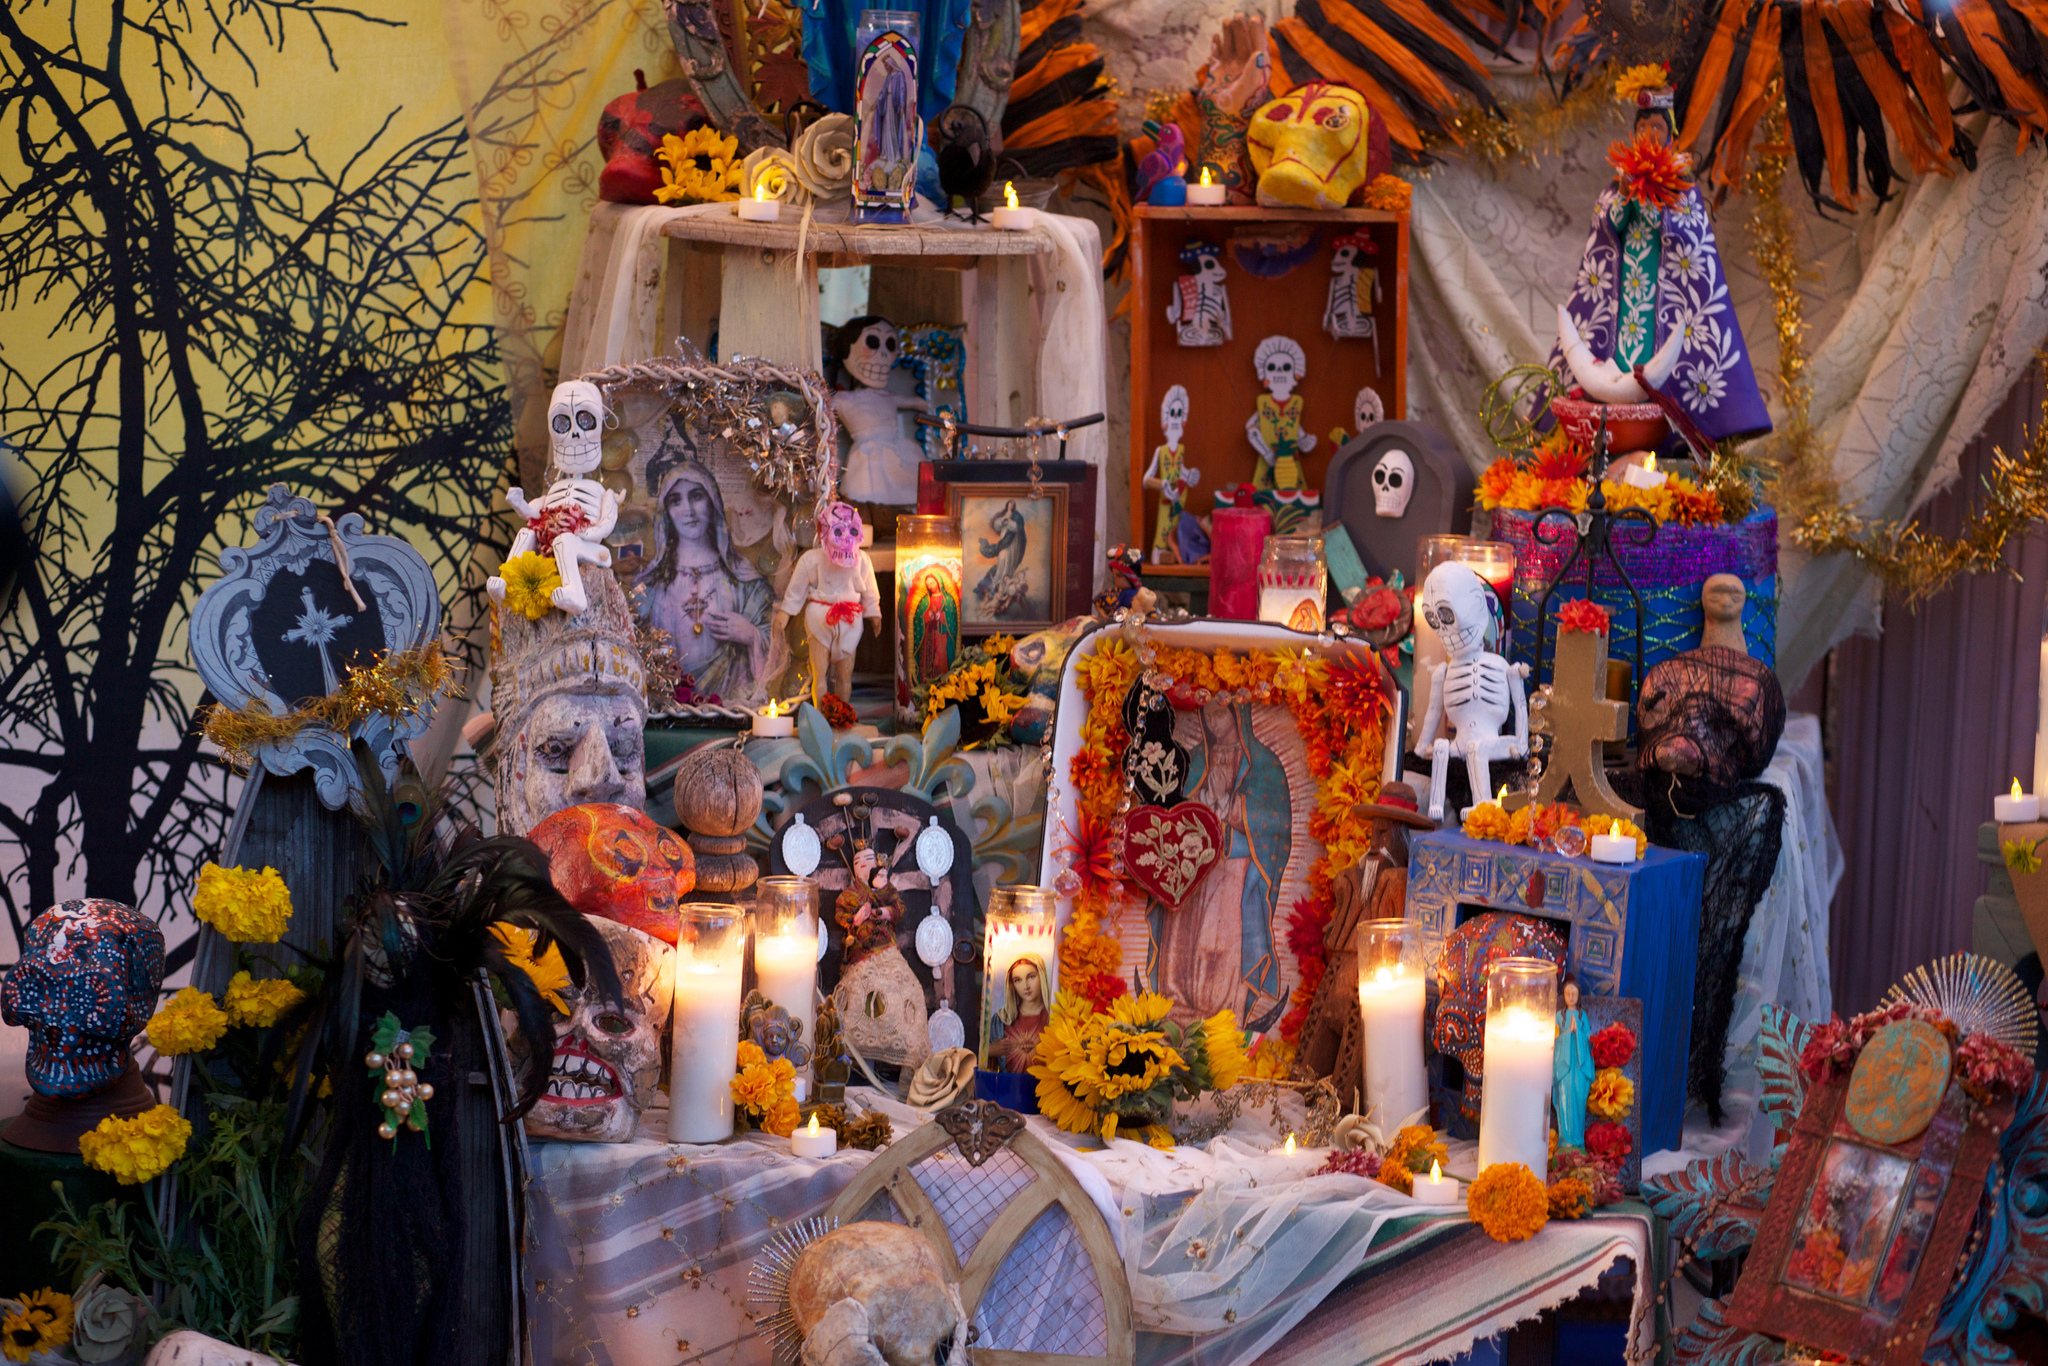 Alter decorated Day of the Dead